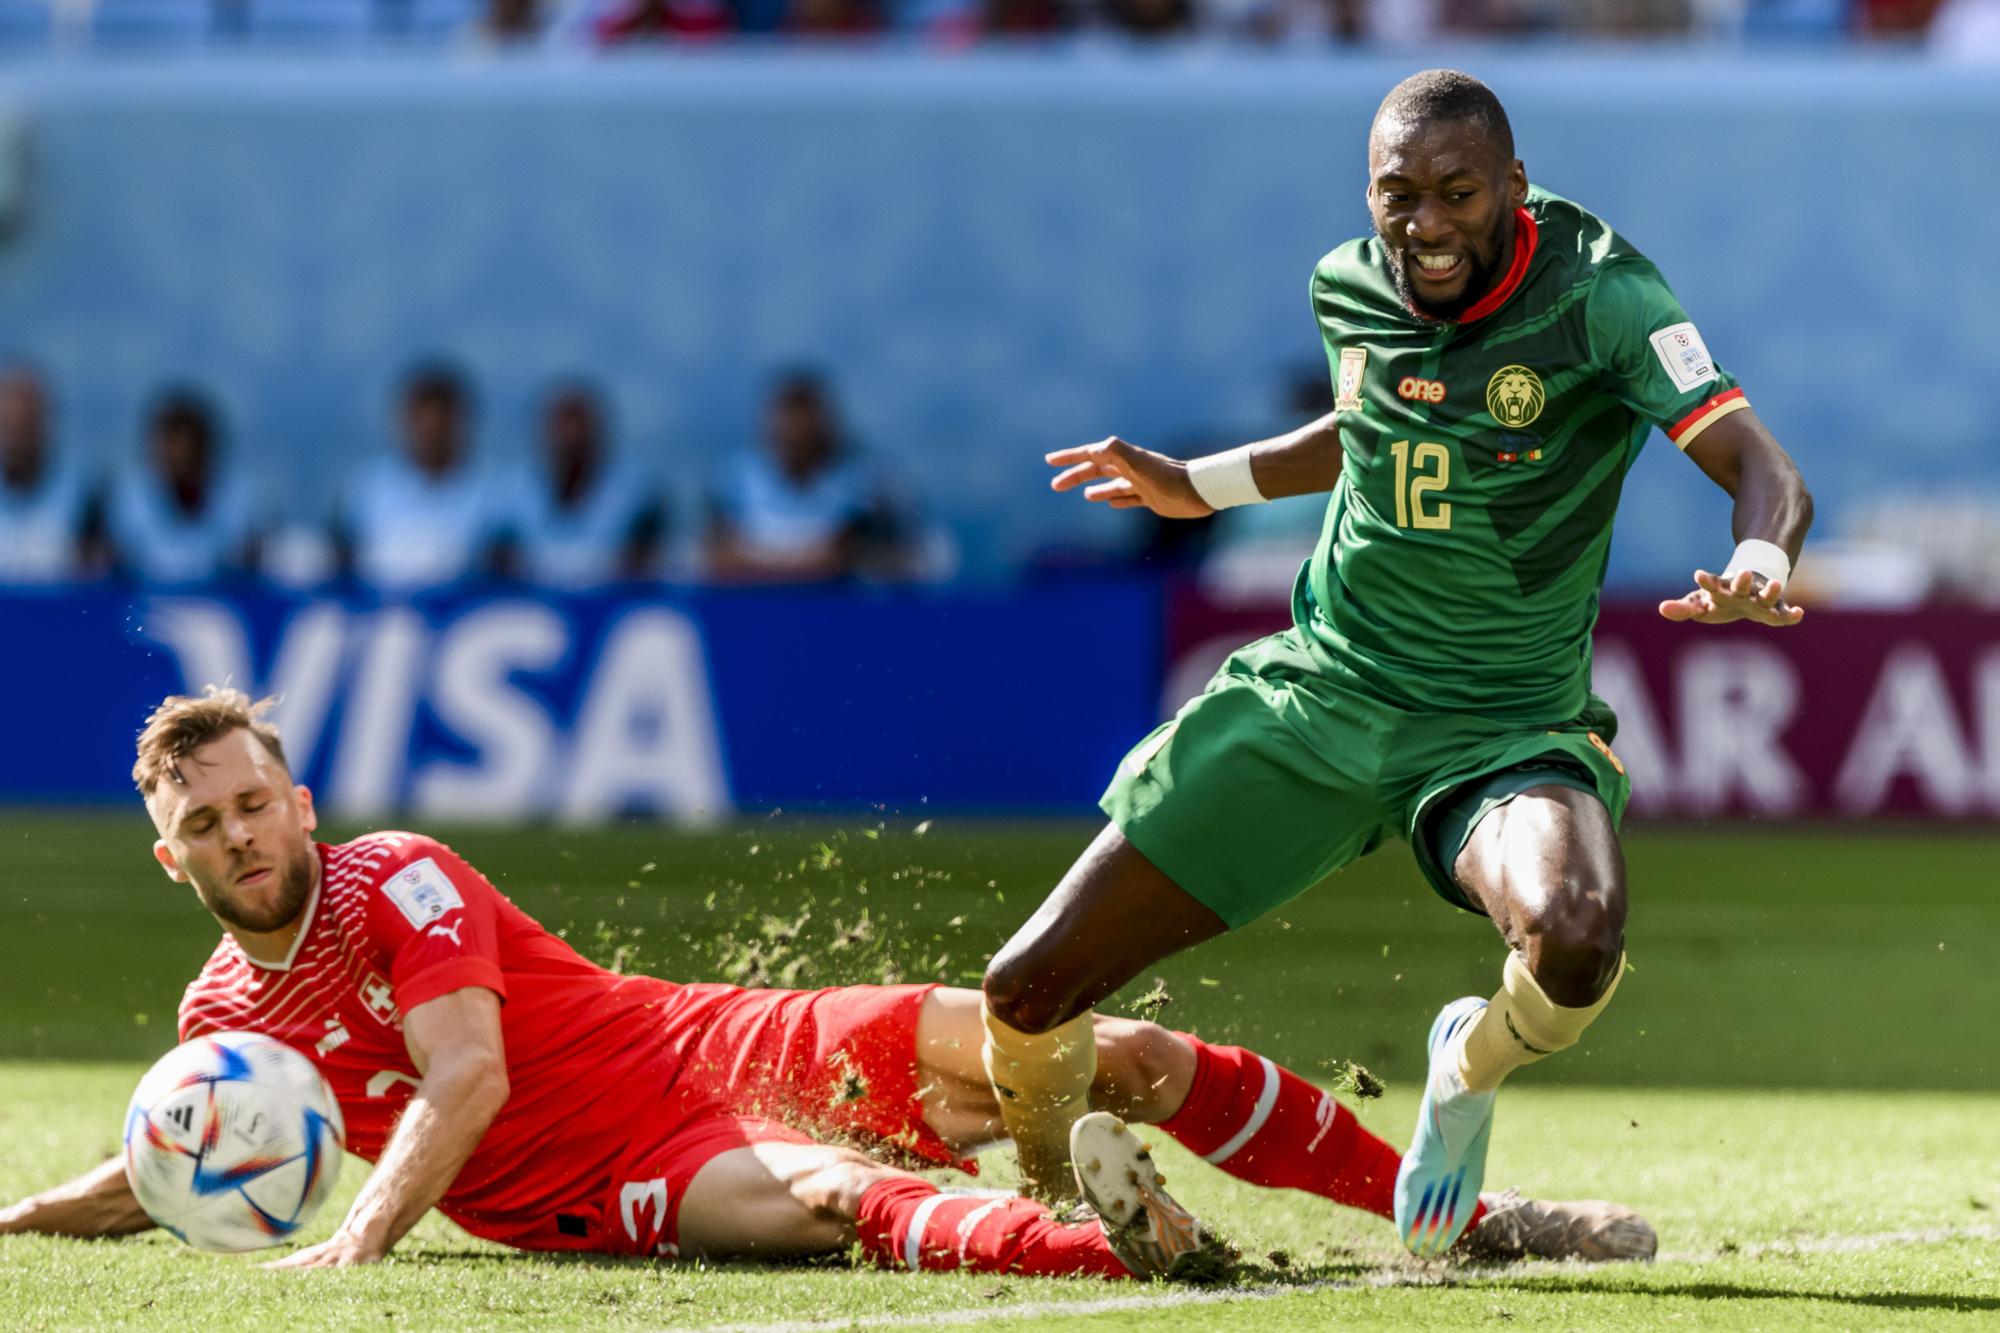 FIFA World Cup 2022 - Group G Switzerland vs Cameroon